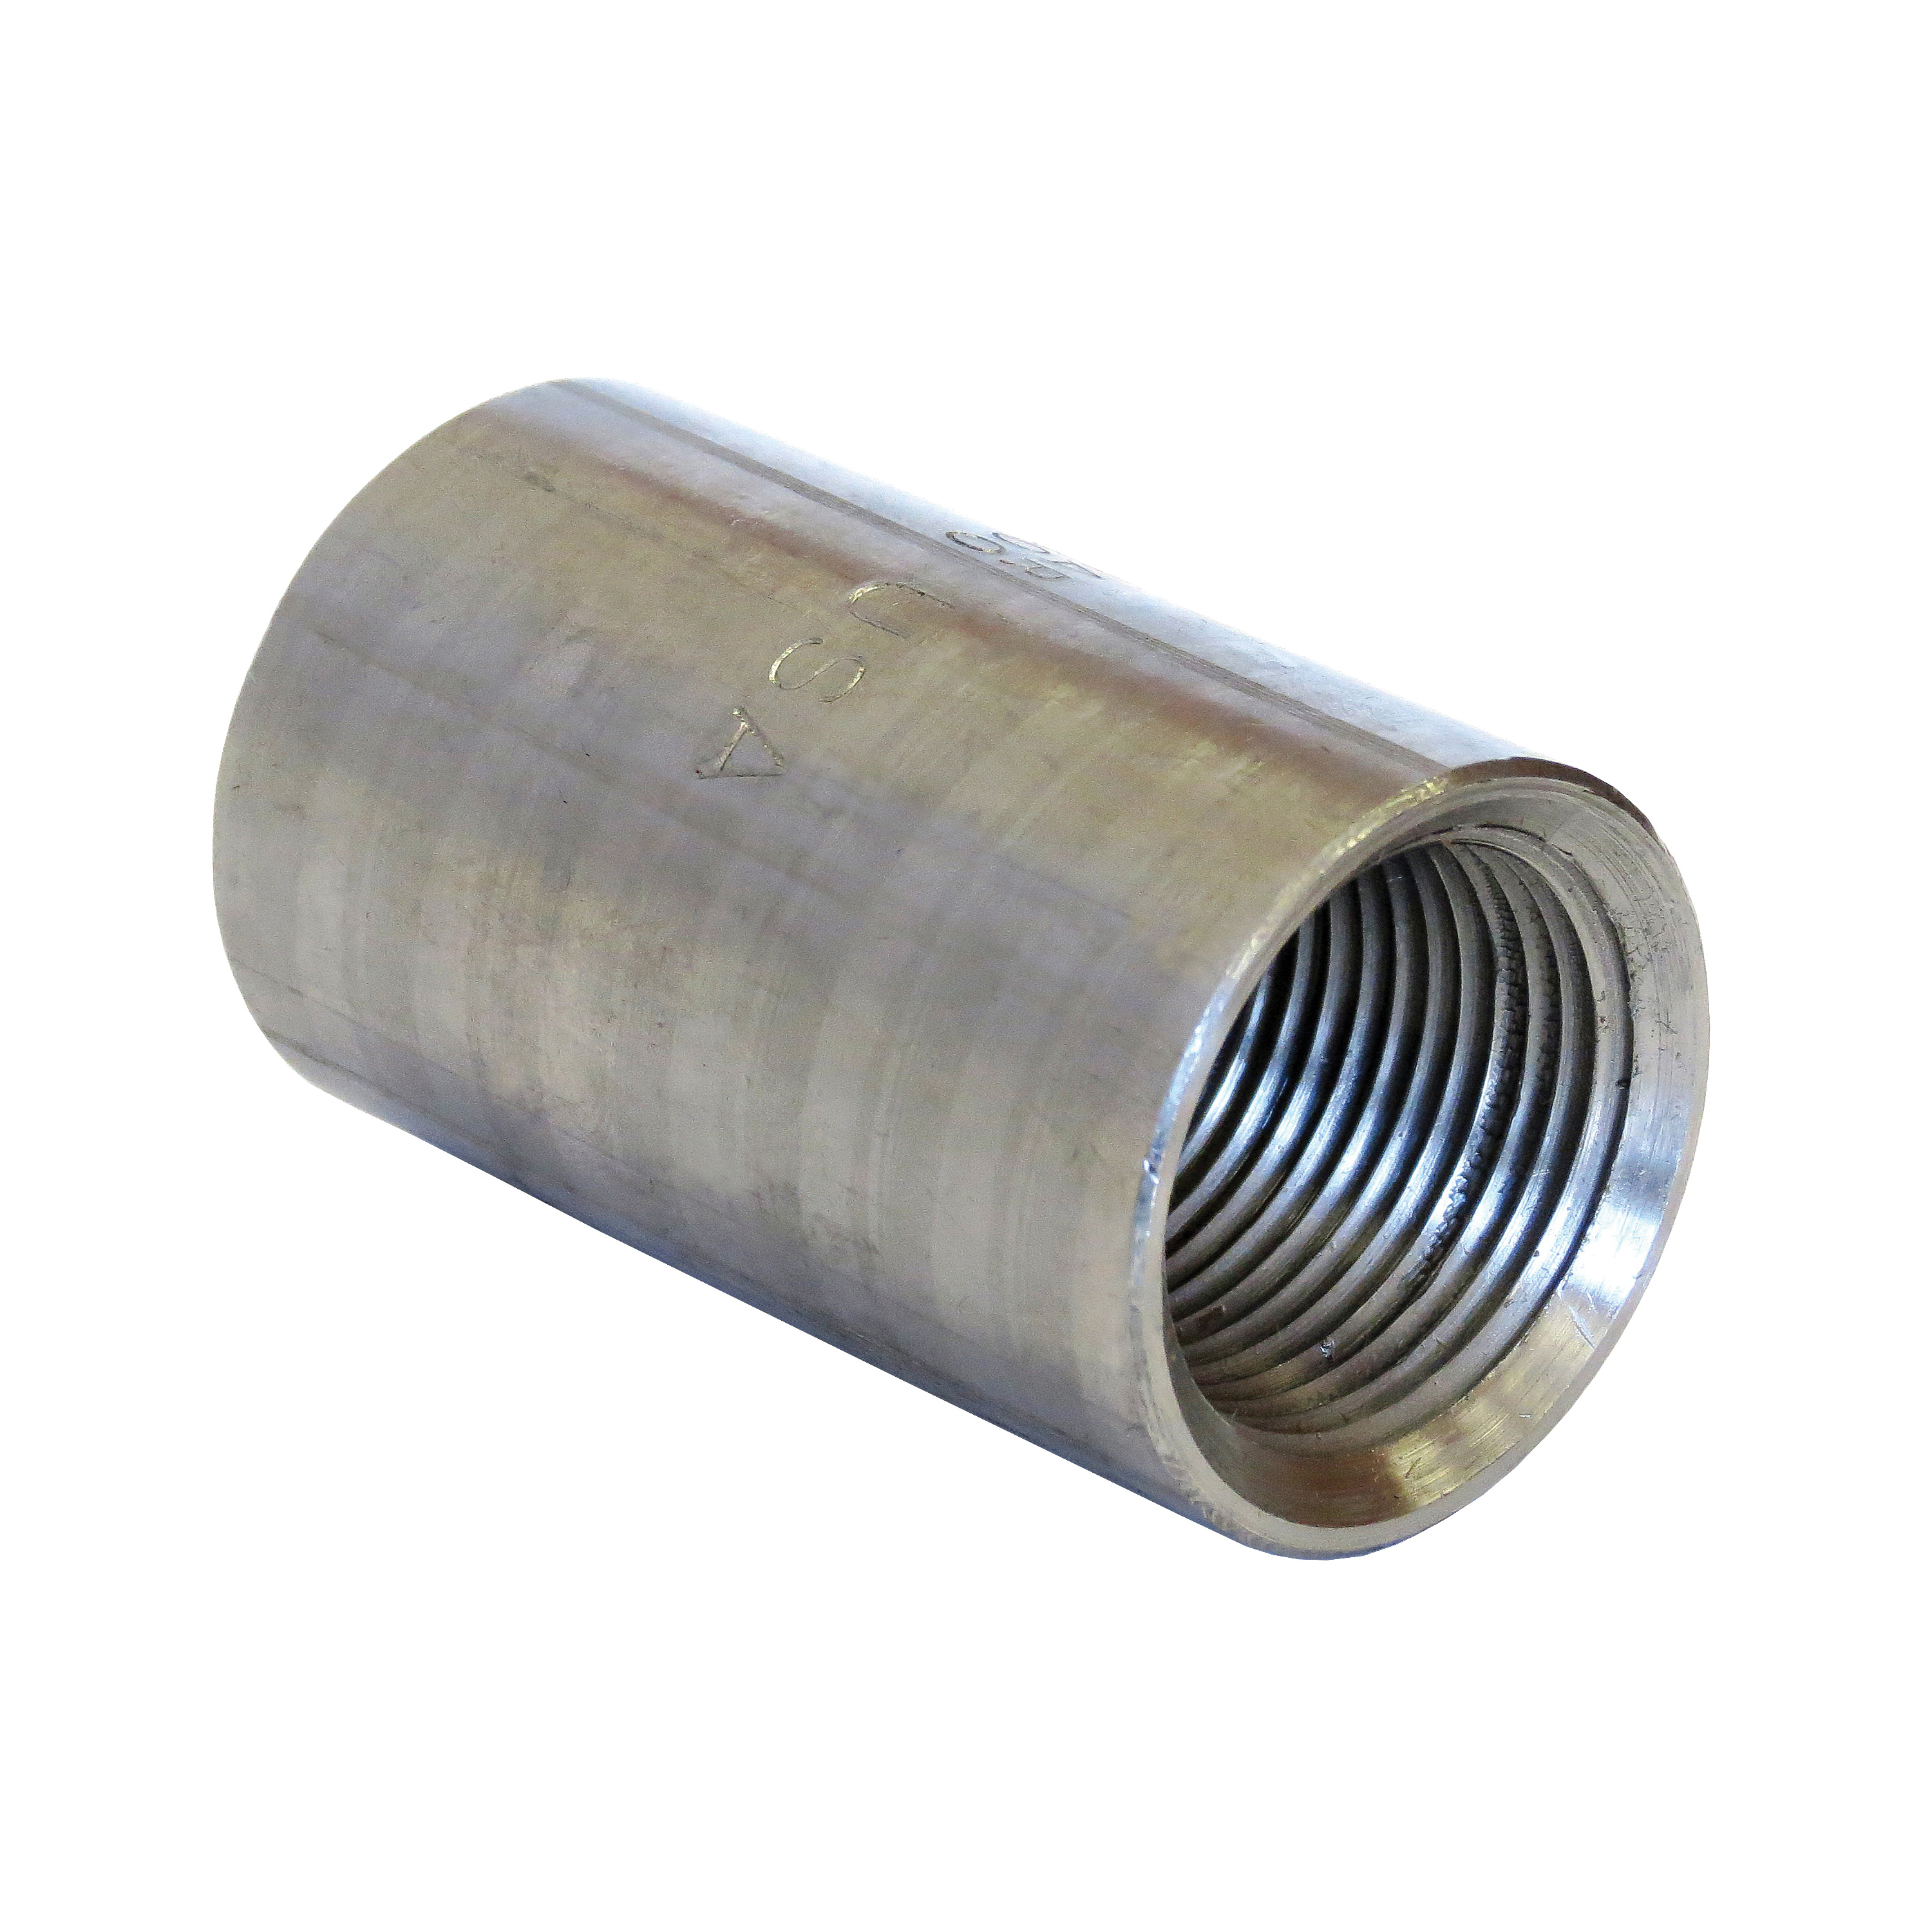 0321200602 FIG 337 Taper Tapped Non-Recessed Full Coupling, Steel, 4-5/8 in, SCH 80/XH and SCH XS, NPT, Galvanized, Domestic